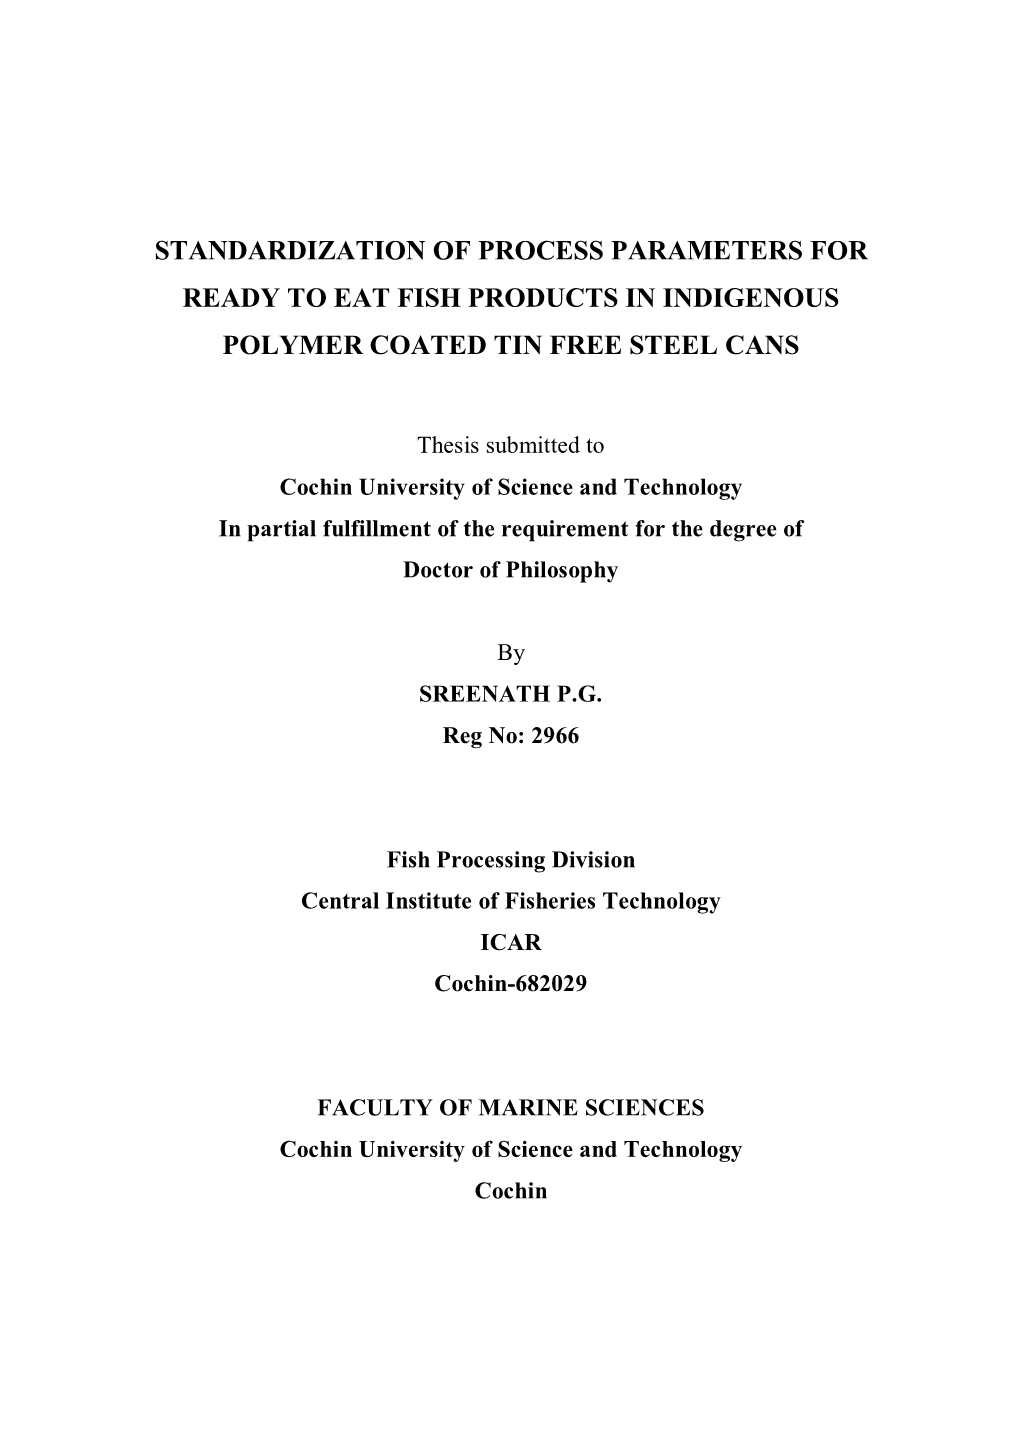 Standardization of Process Parameters for Ready to Eat Fish Products in Indigenous Polymer Coated Tin Free Steel Cans